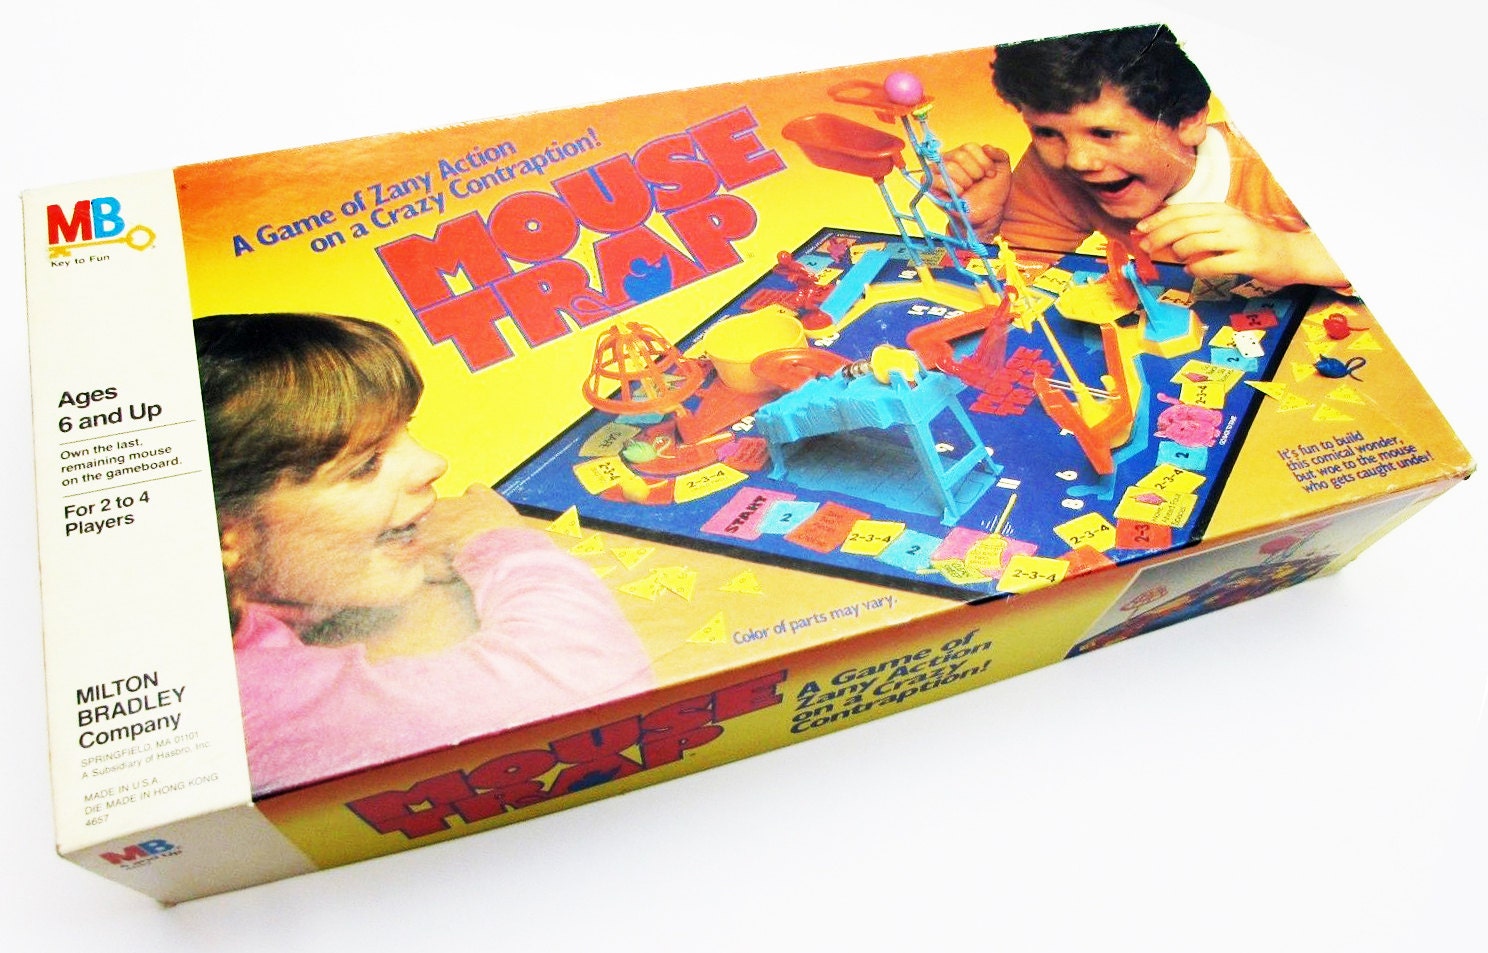 Vintage 1984 Mouse Trap Game in Box, No Balls or Rules Otherwise Complete,  Game in Very Good Used Condition, Box Worn, Rube Goldberg Game 